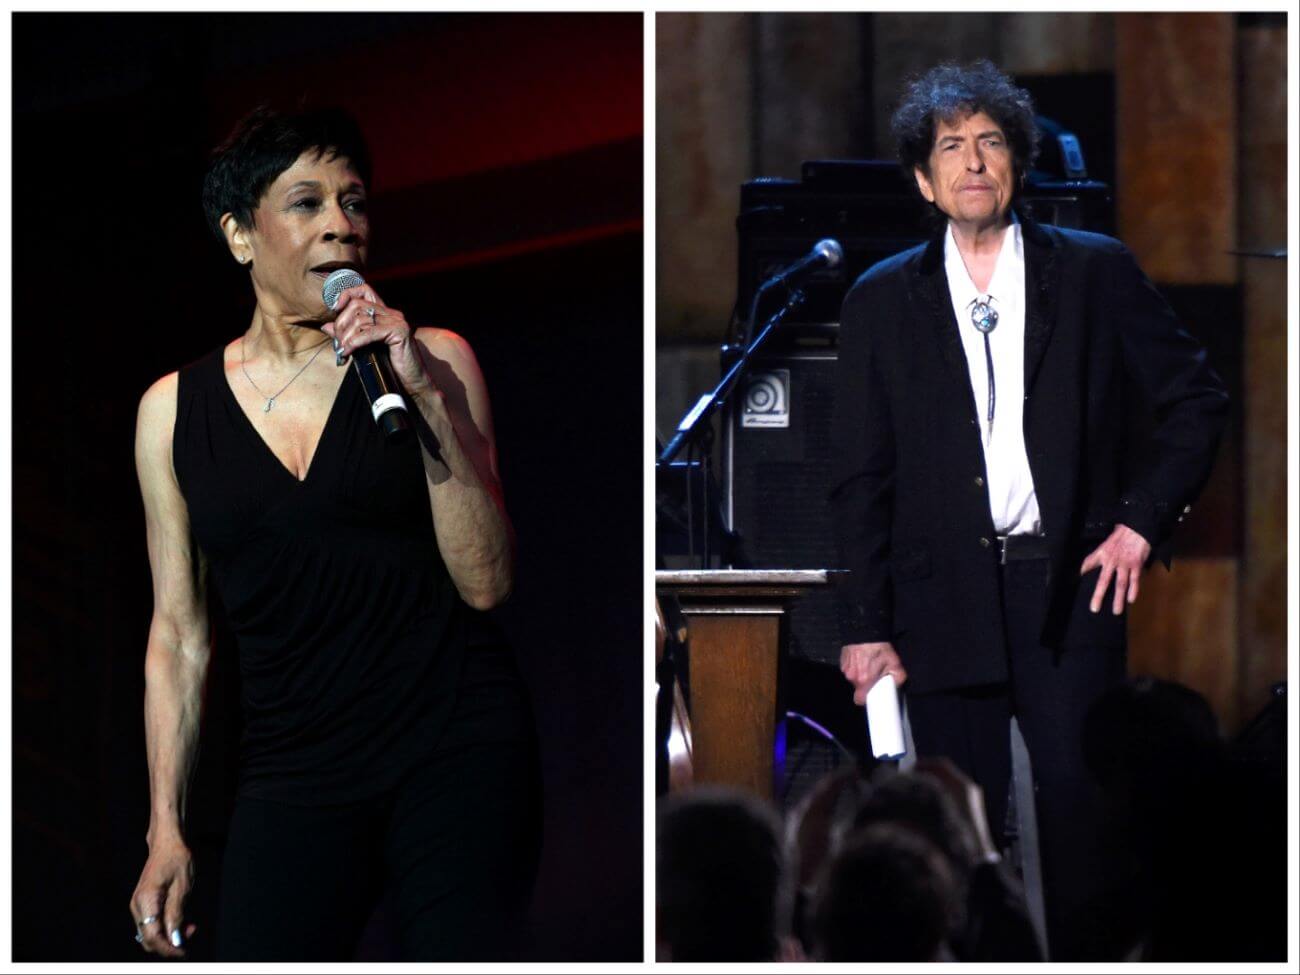 Bettye LaVette wears a black dress and sings into a microphone. Bob Dylan stands on a stage wearing a suit. He rests his hand on his hip.